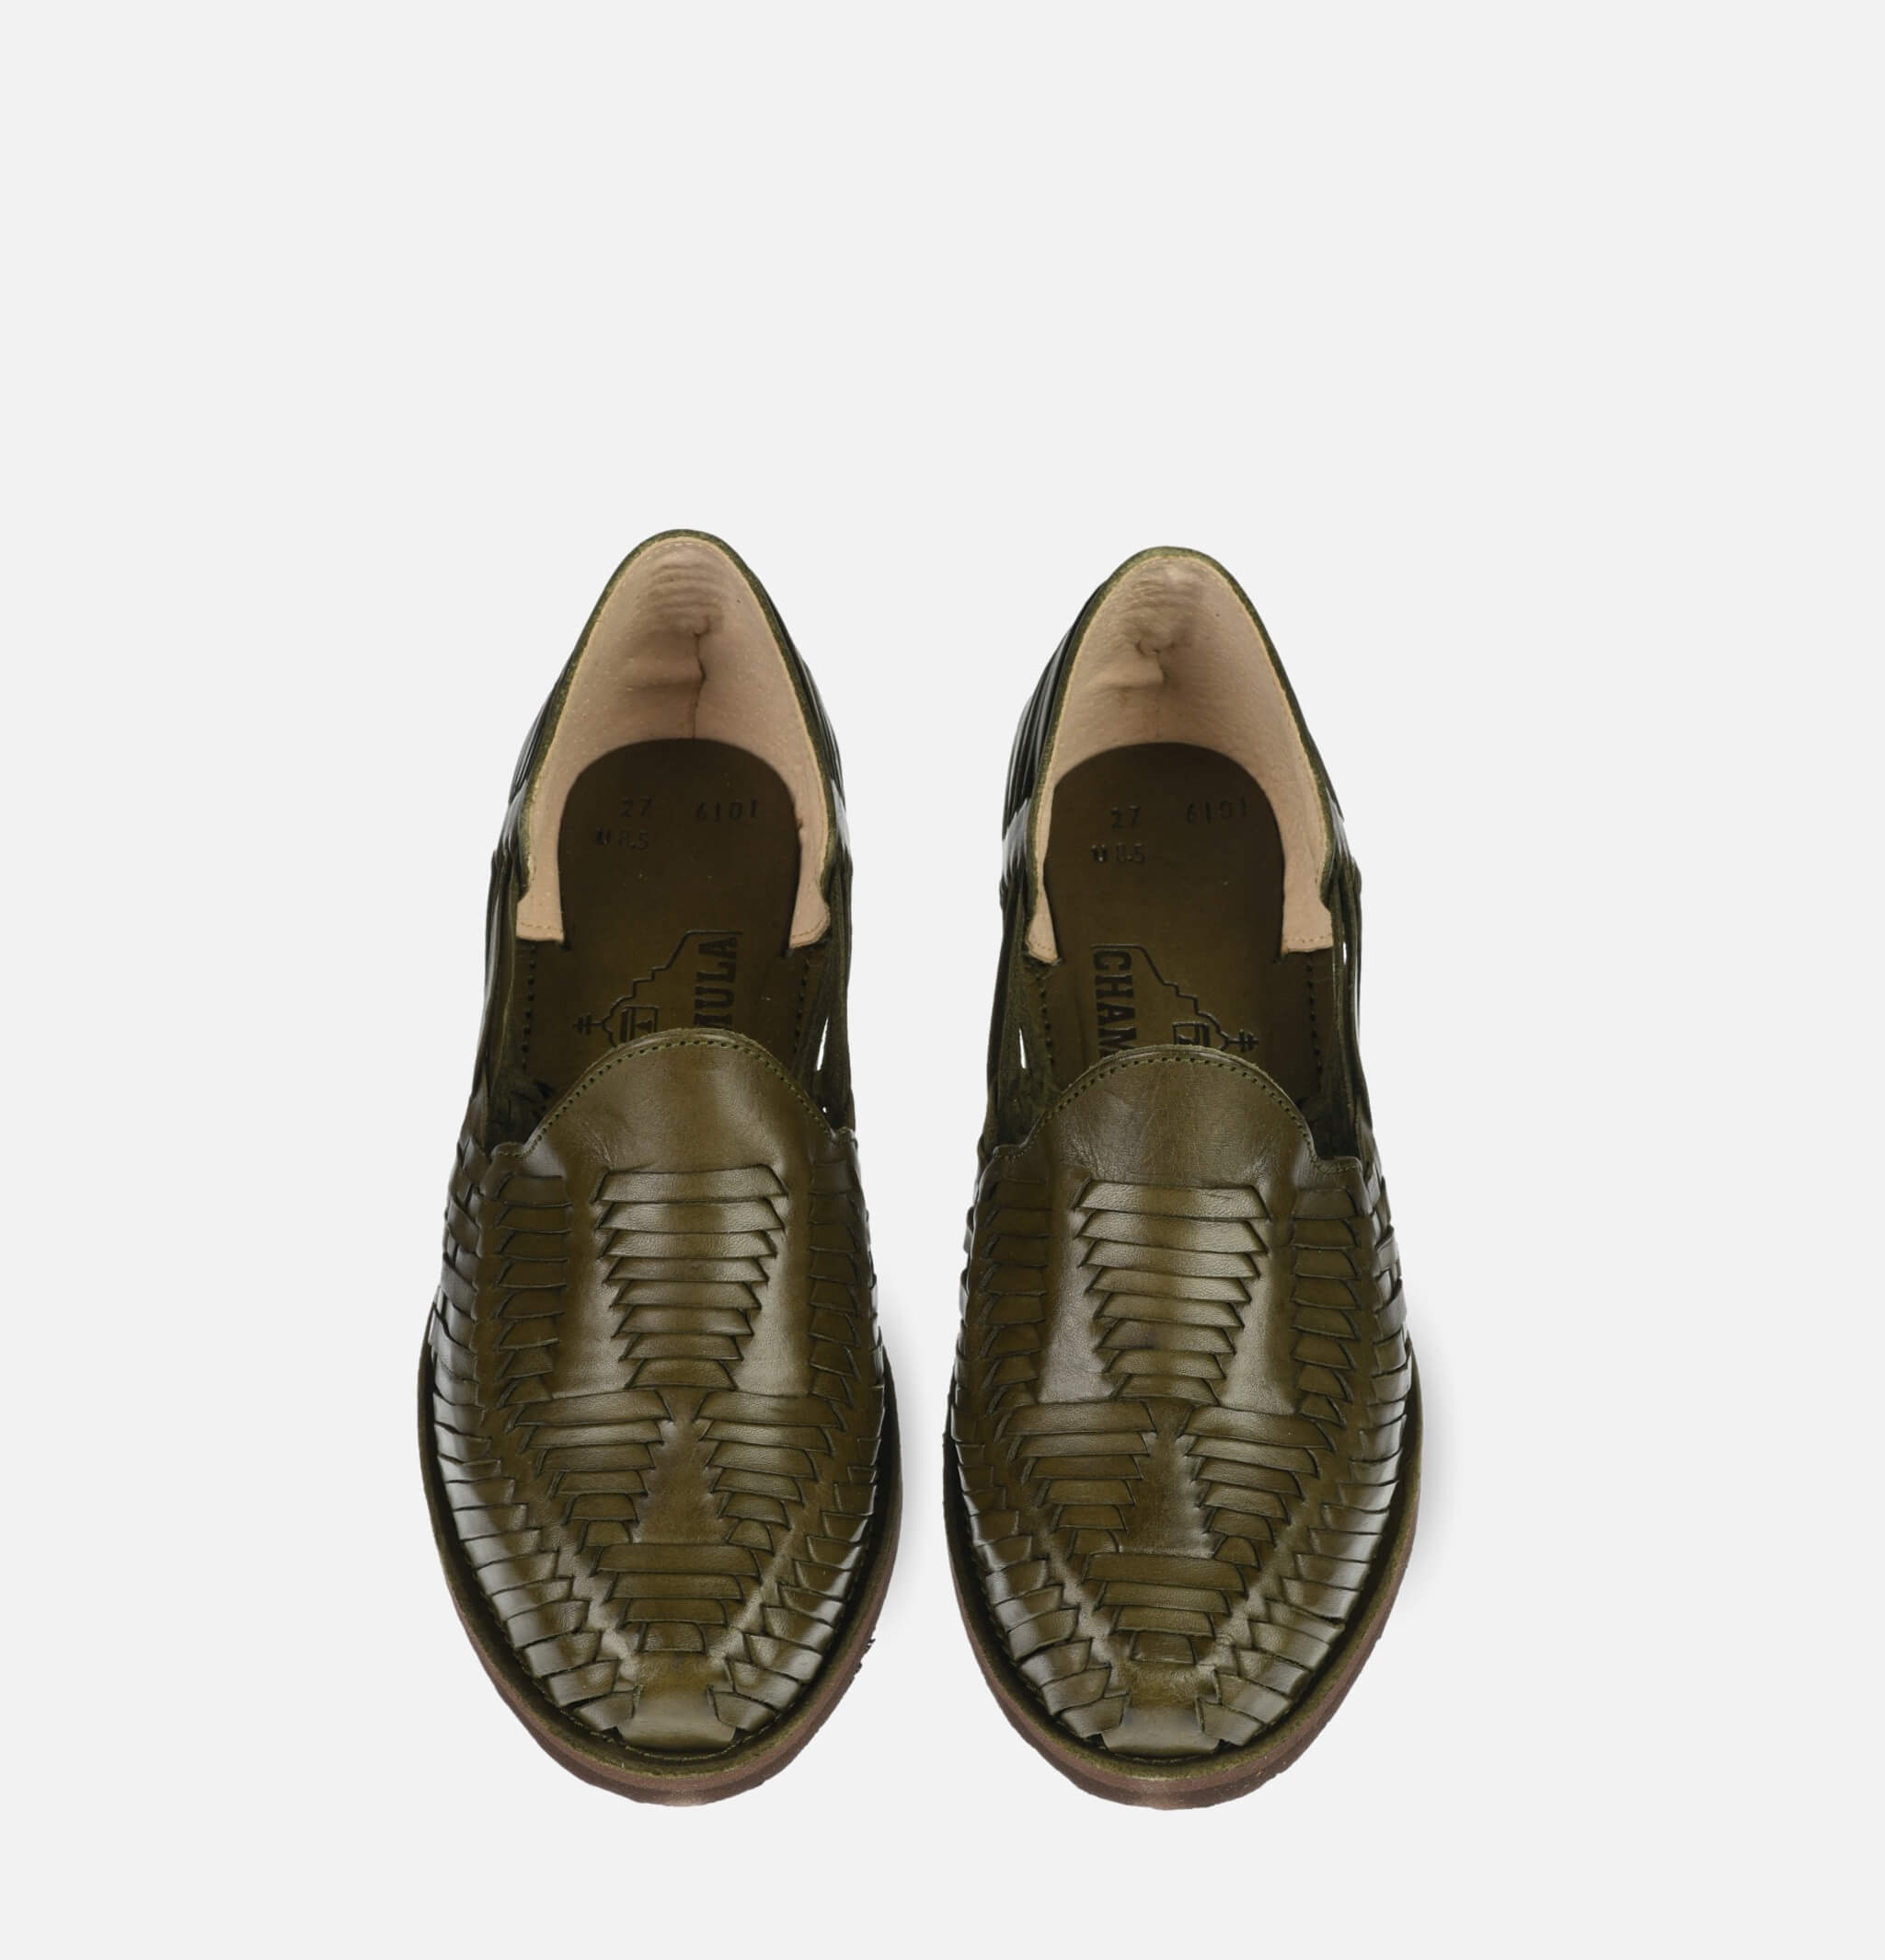 Chaussures Cancun Olive